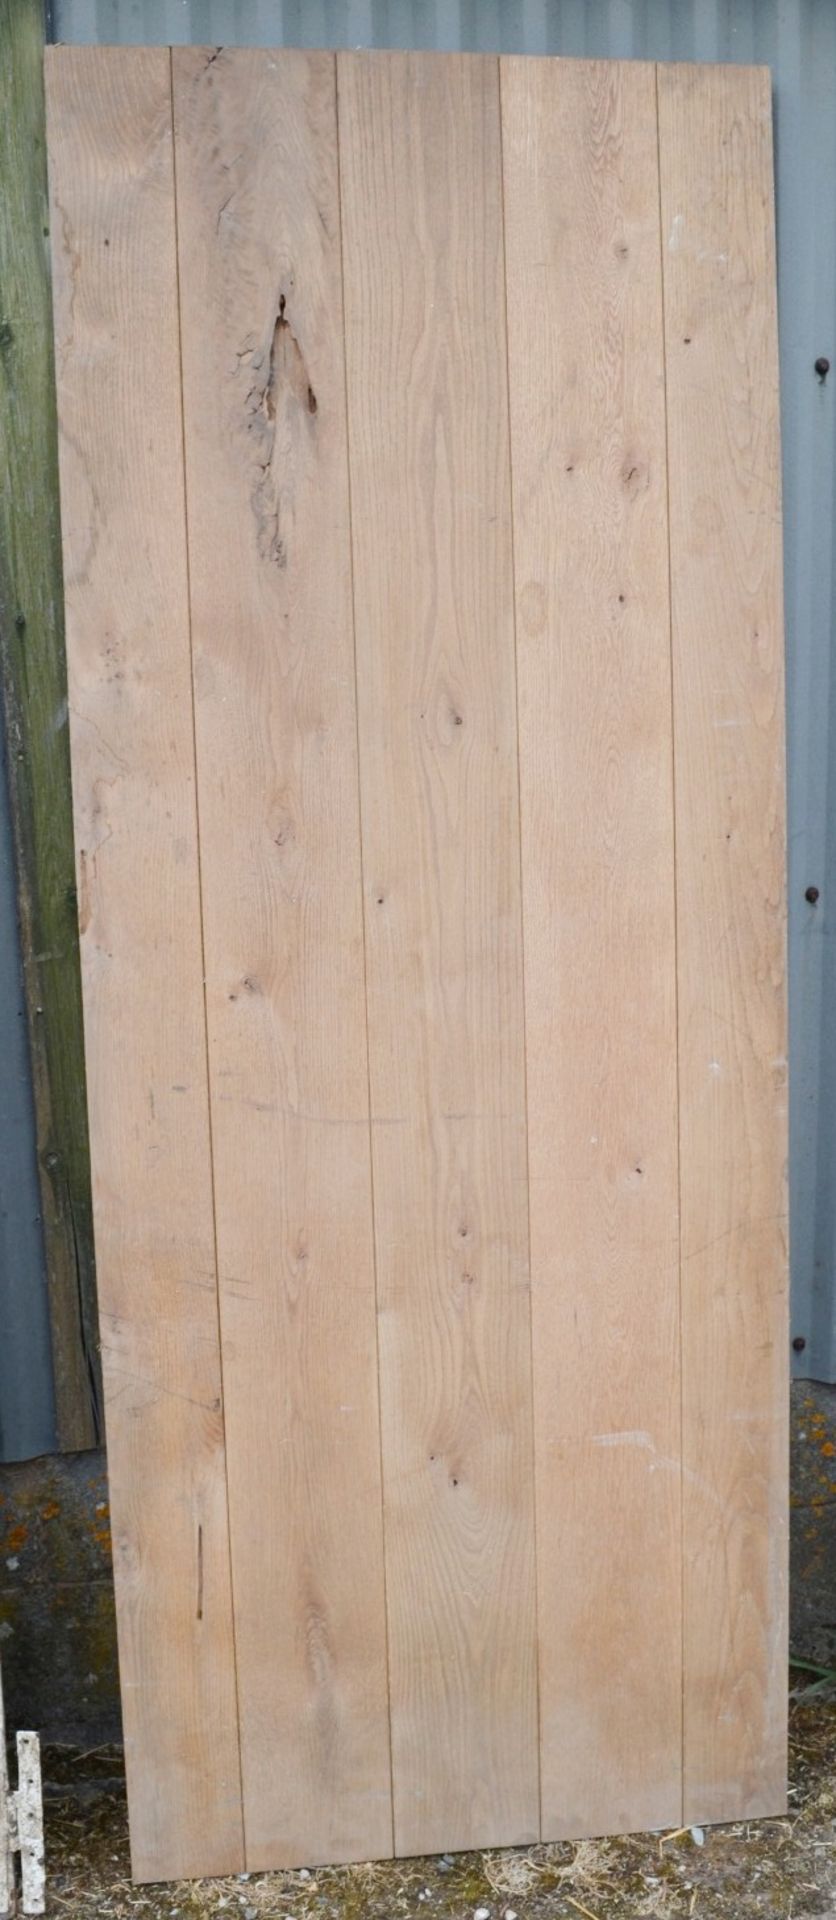 Set Of 4 x Reclaimed Unpainted Wooden Doors - Taken From A Grade II Listed Property - Image 8 of 8